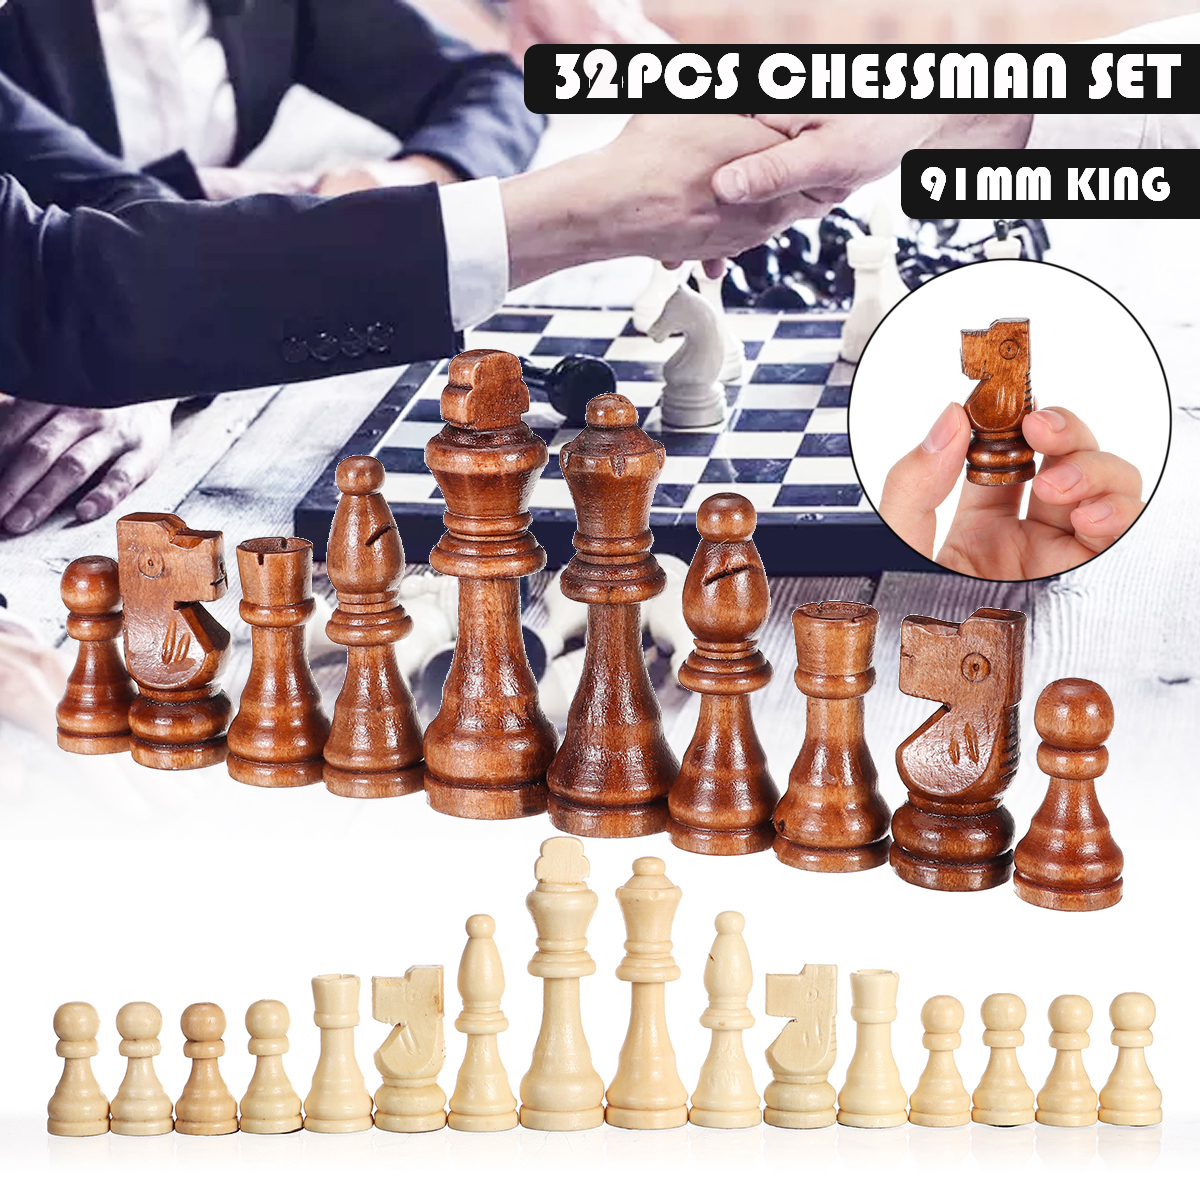 32 Piece Wooden Carved Chess 91mm King Chessman Hand Crafted Set Outdoor 